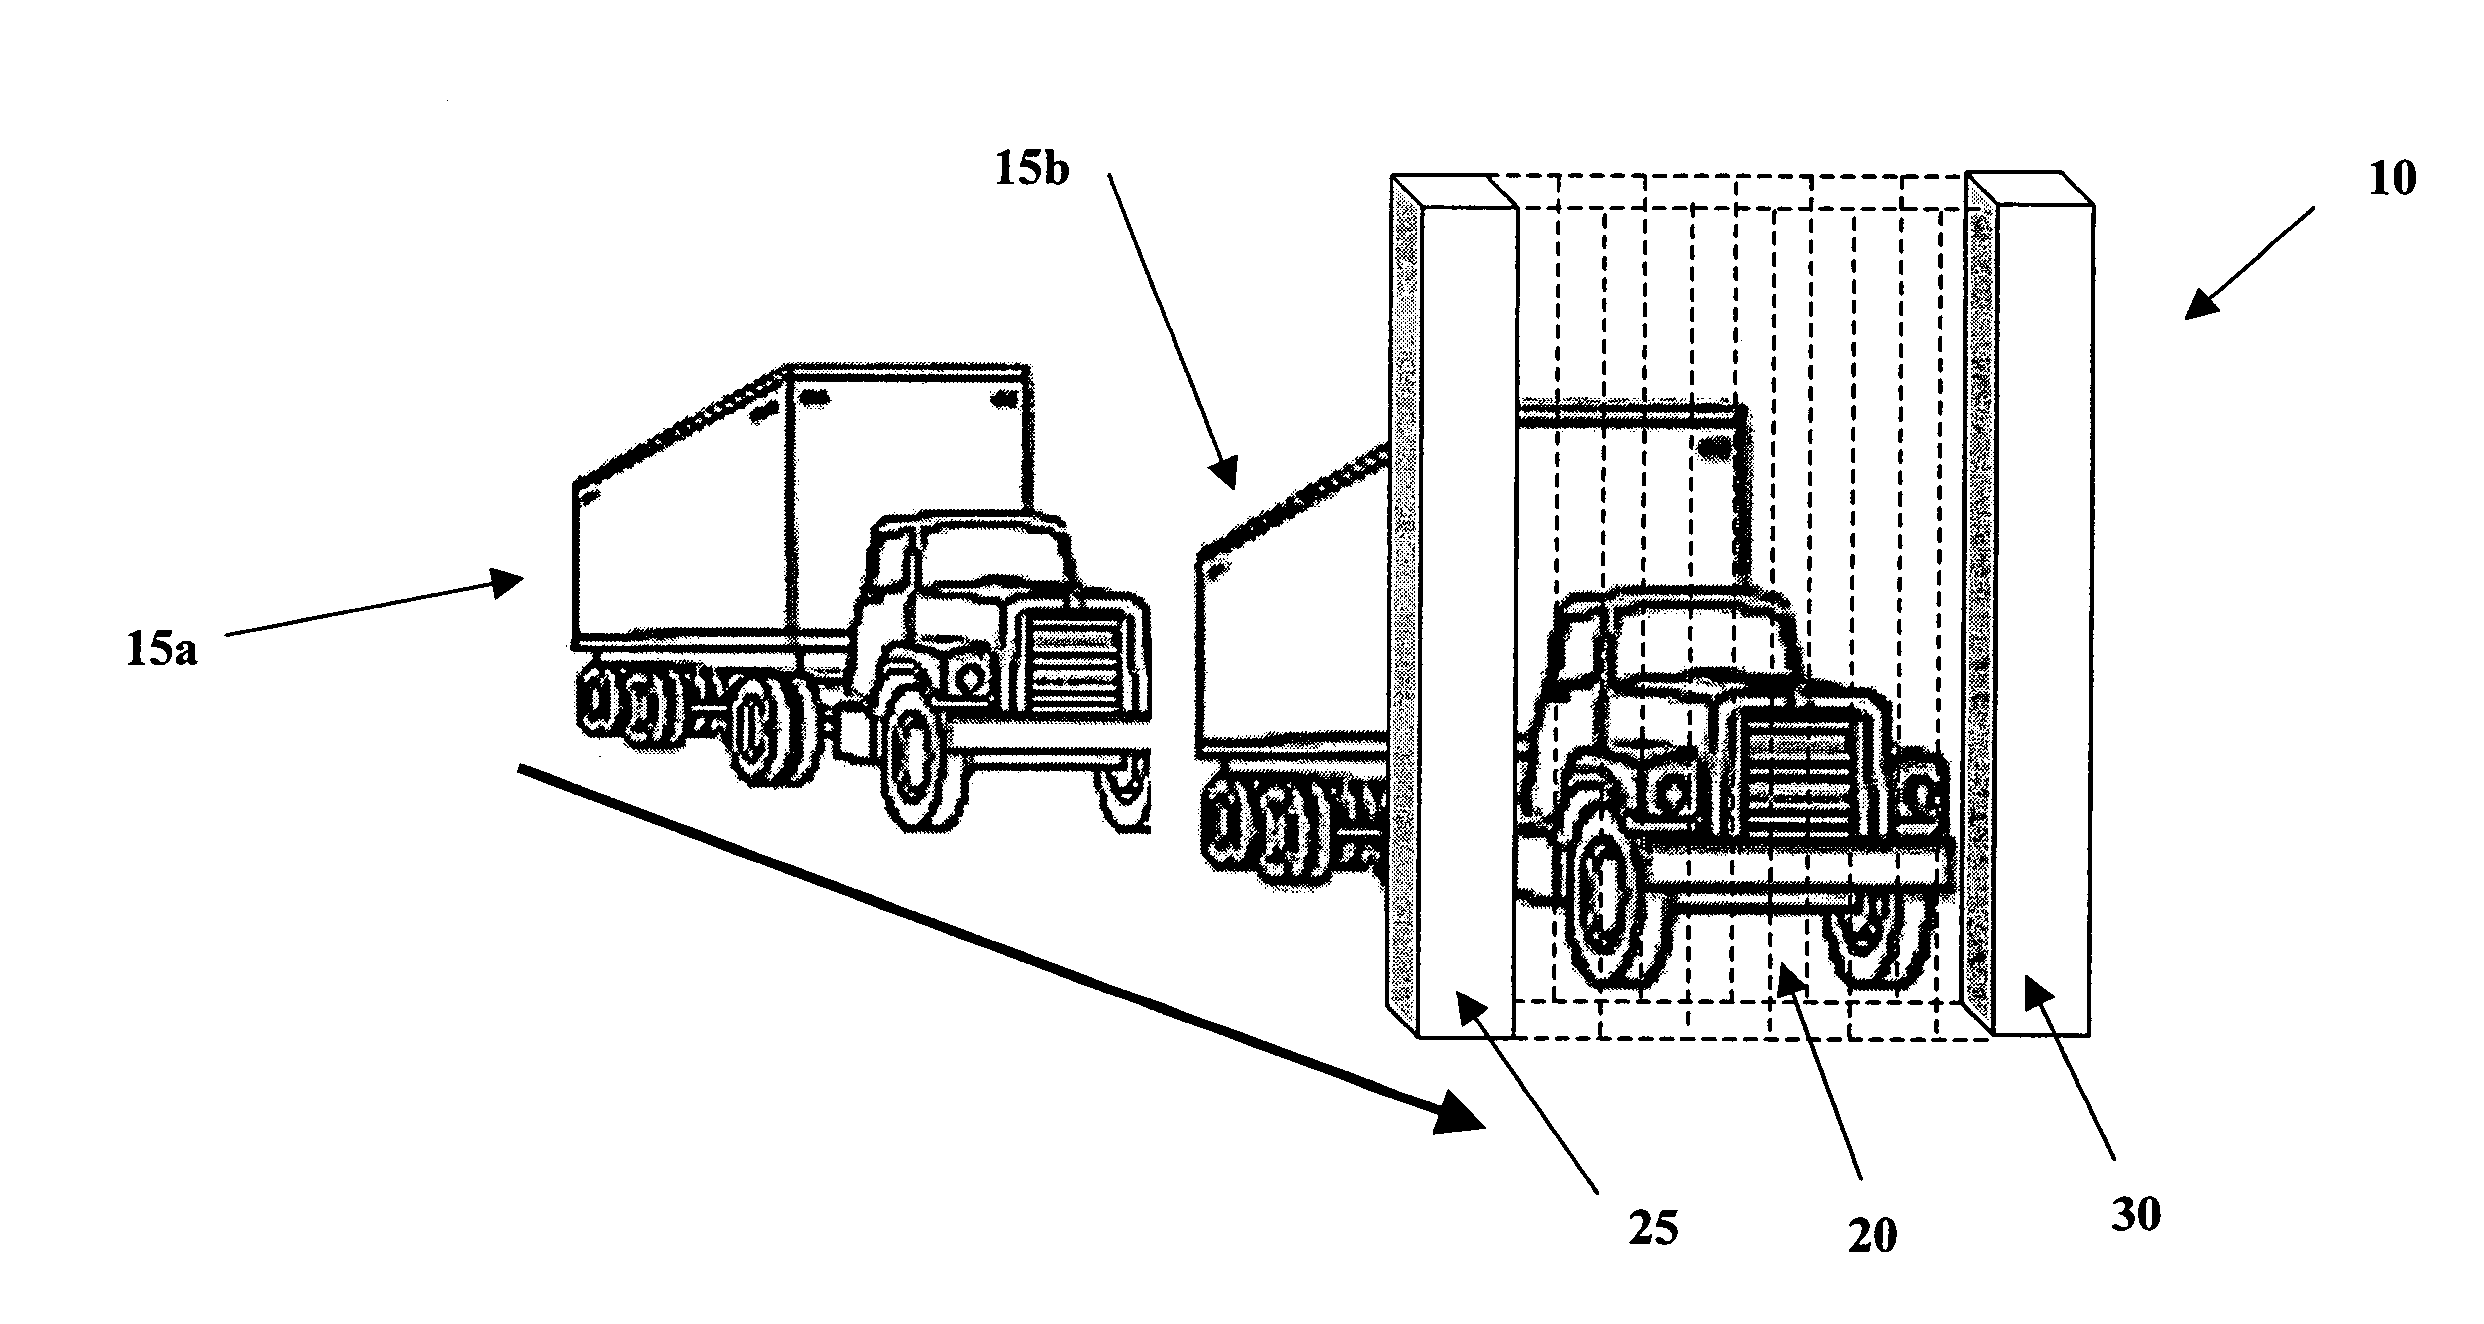 Methods and systems for imaging and classifying targets as empty or non-empty